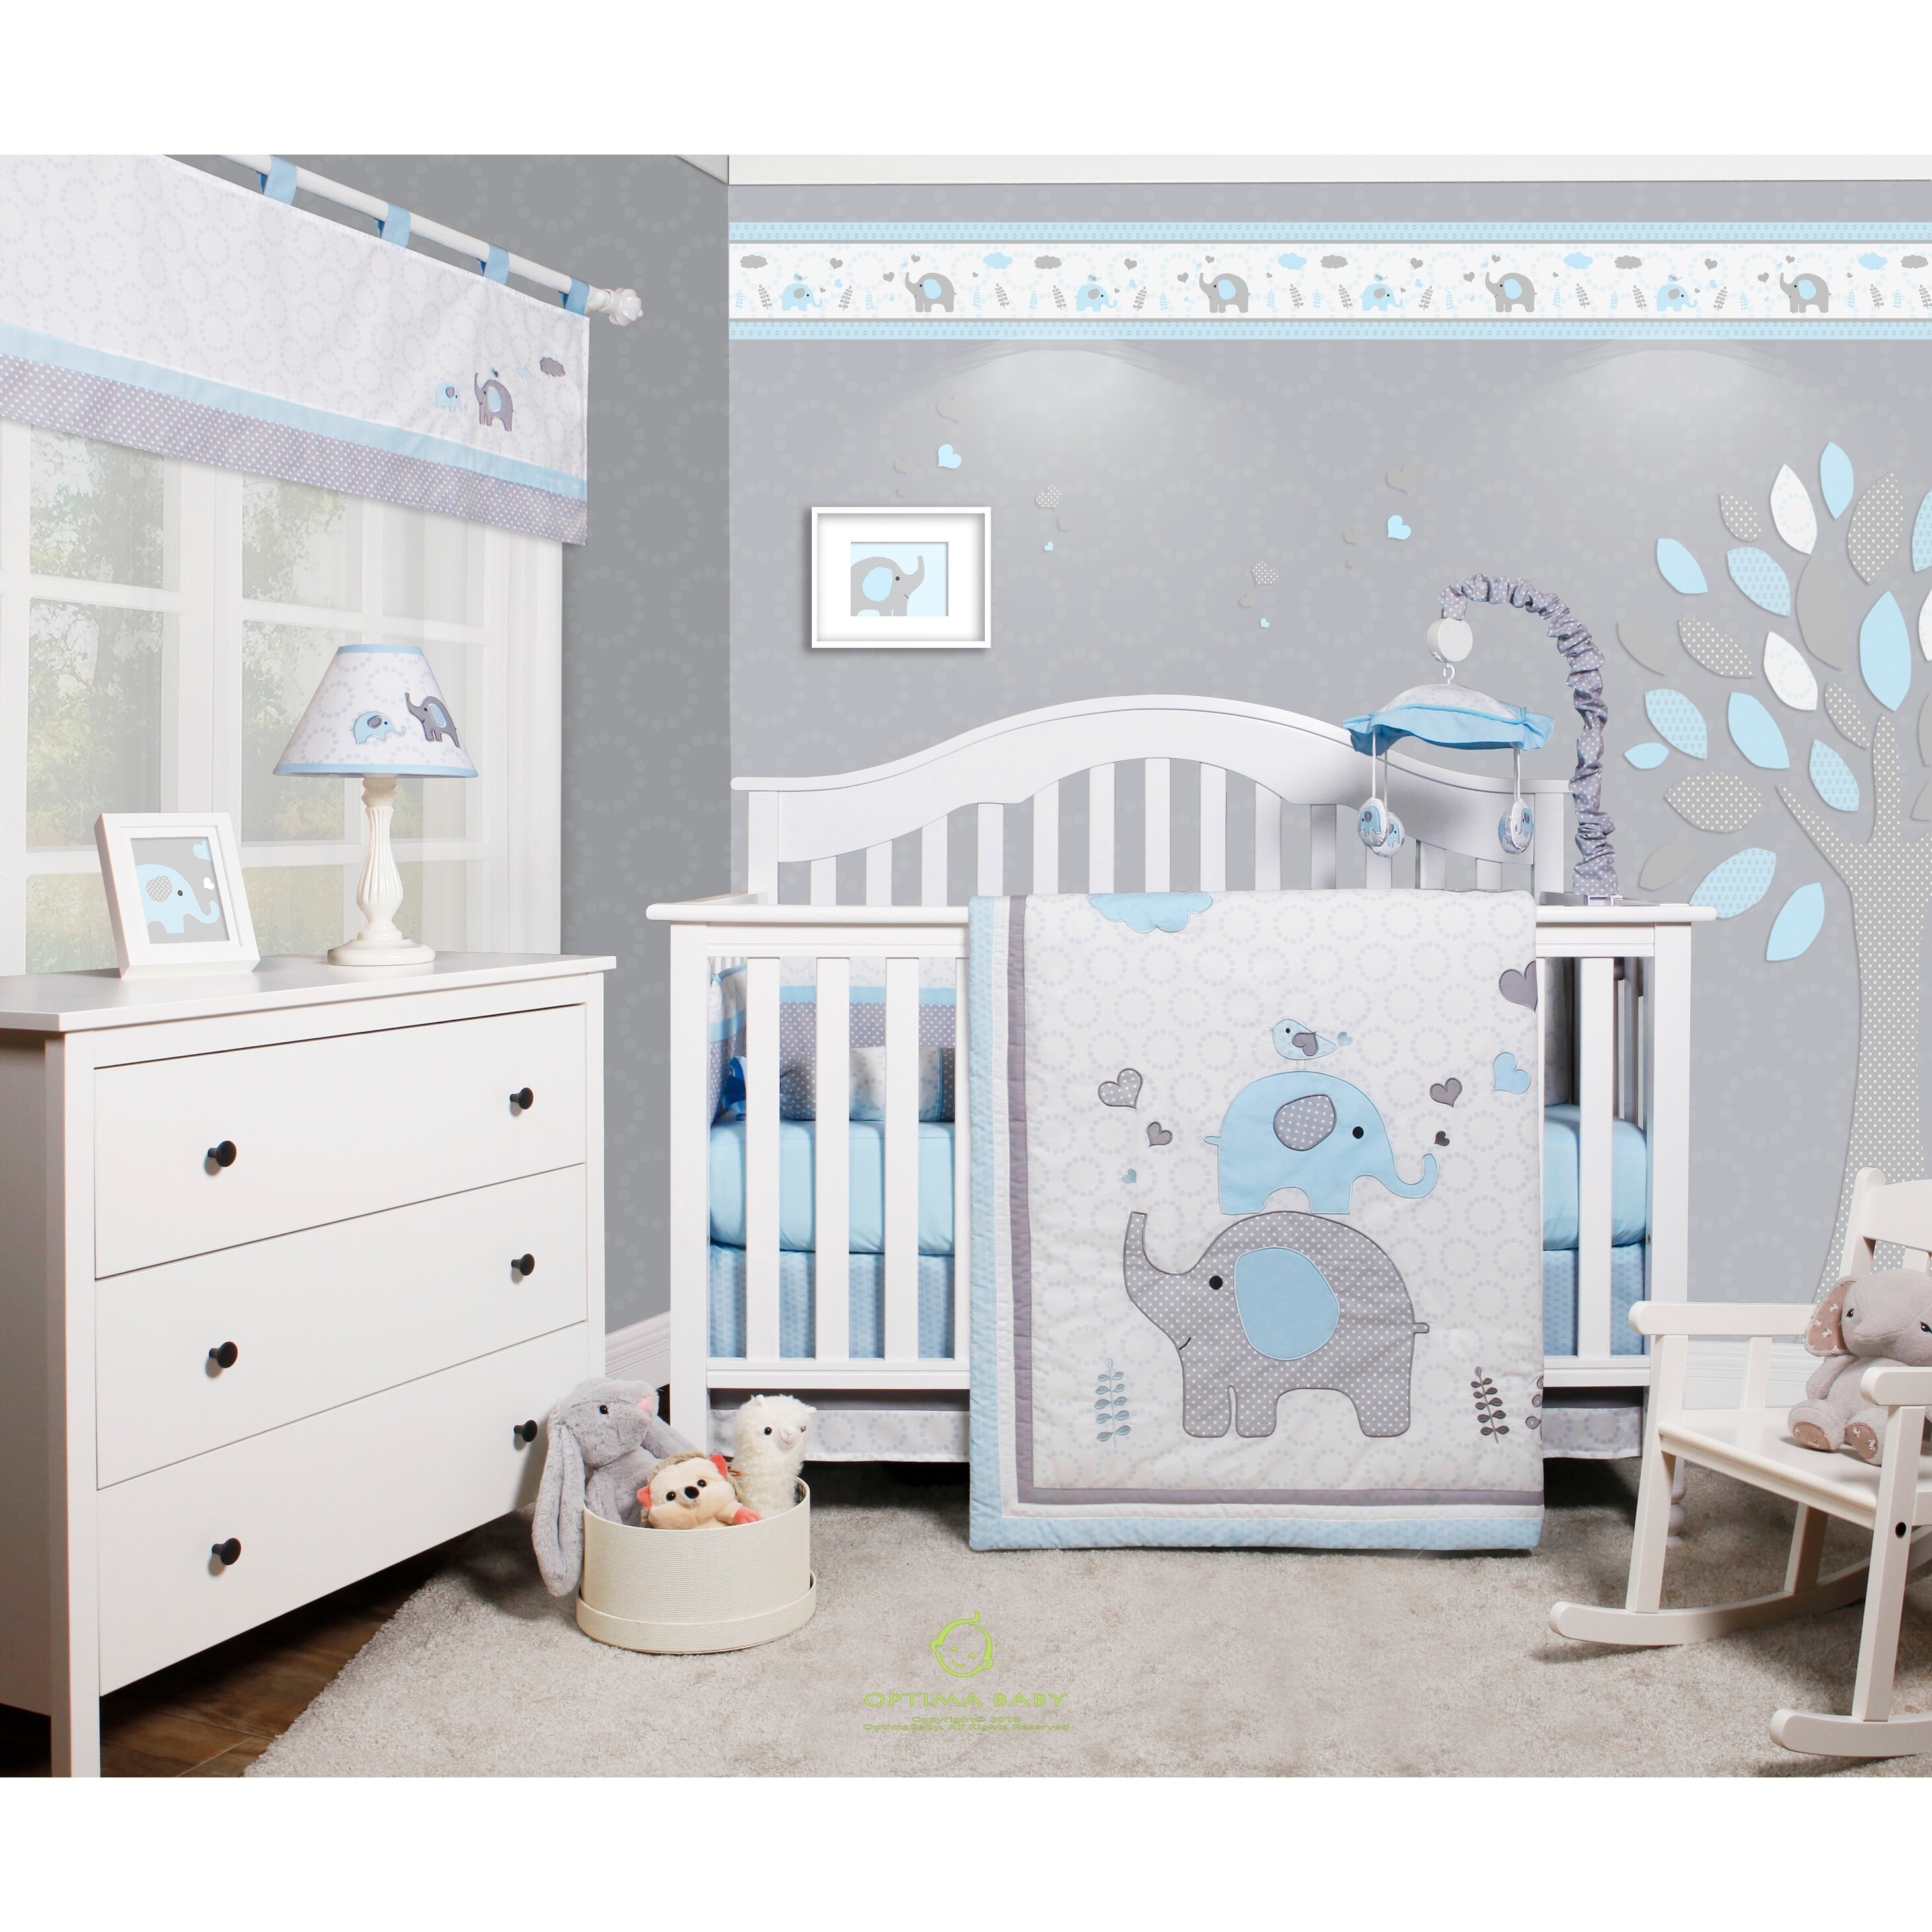 Shop OptimaBaby Blue Gray Elephant 6 